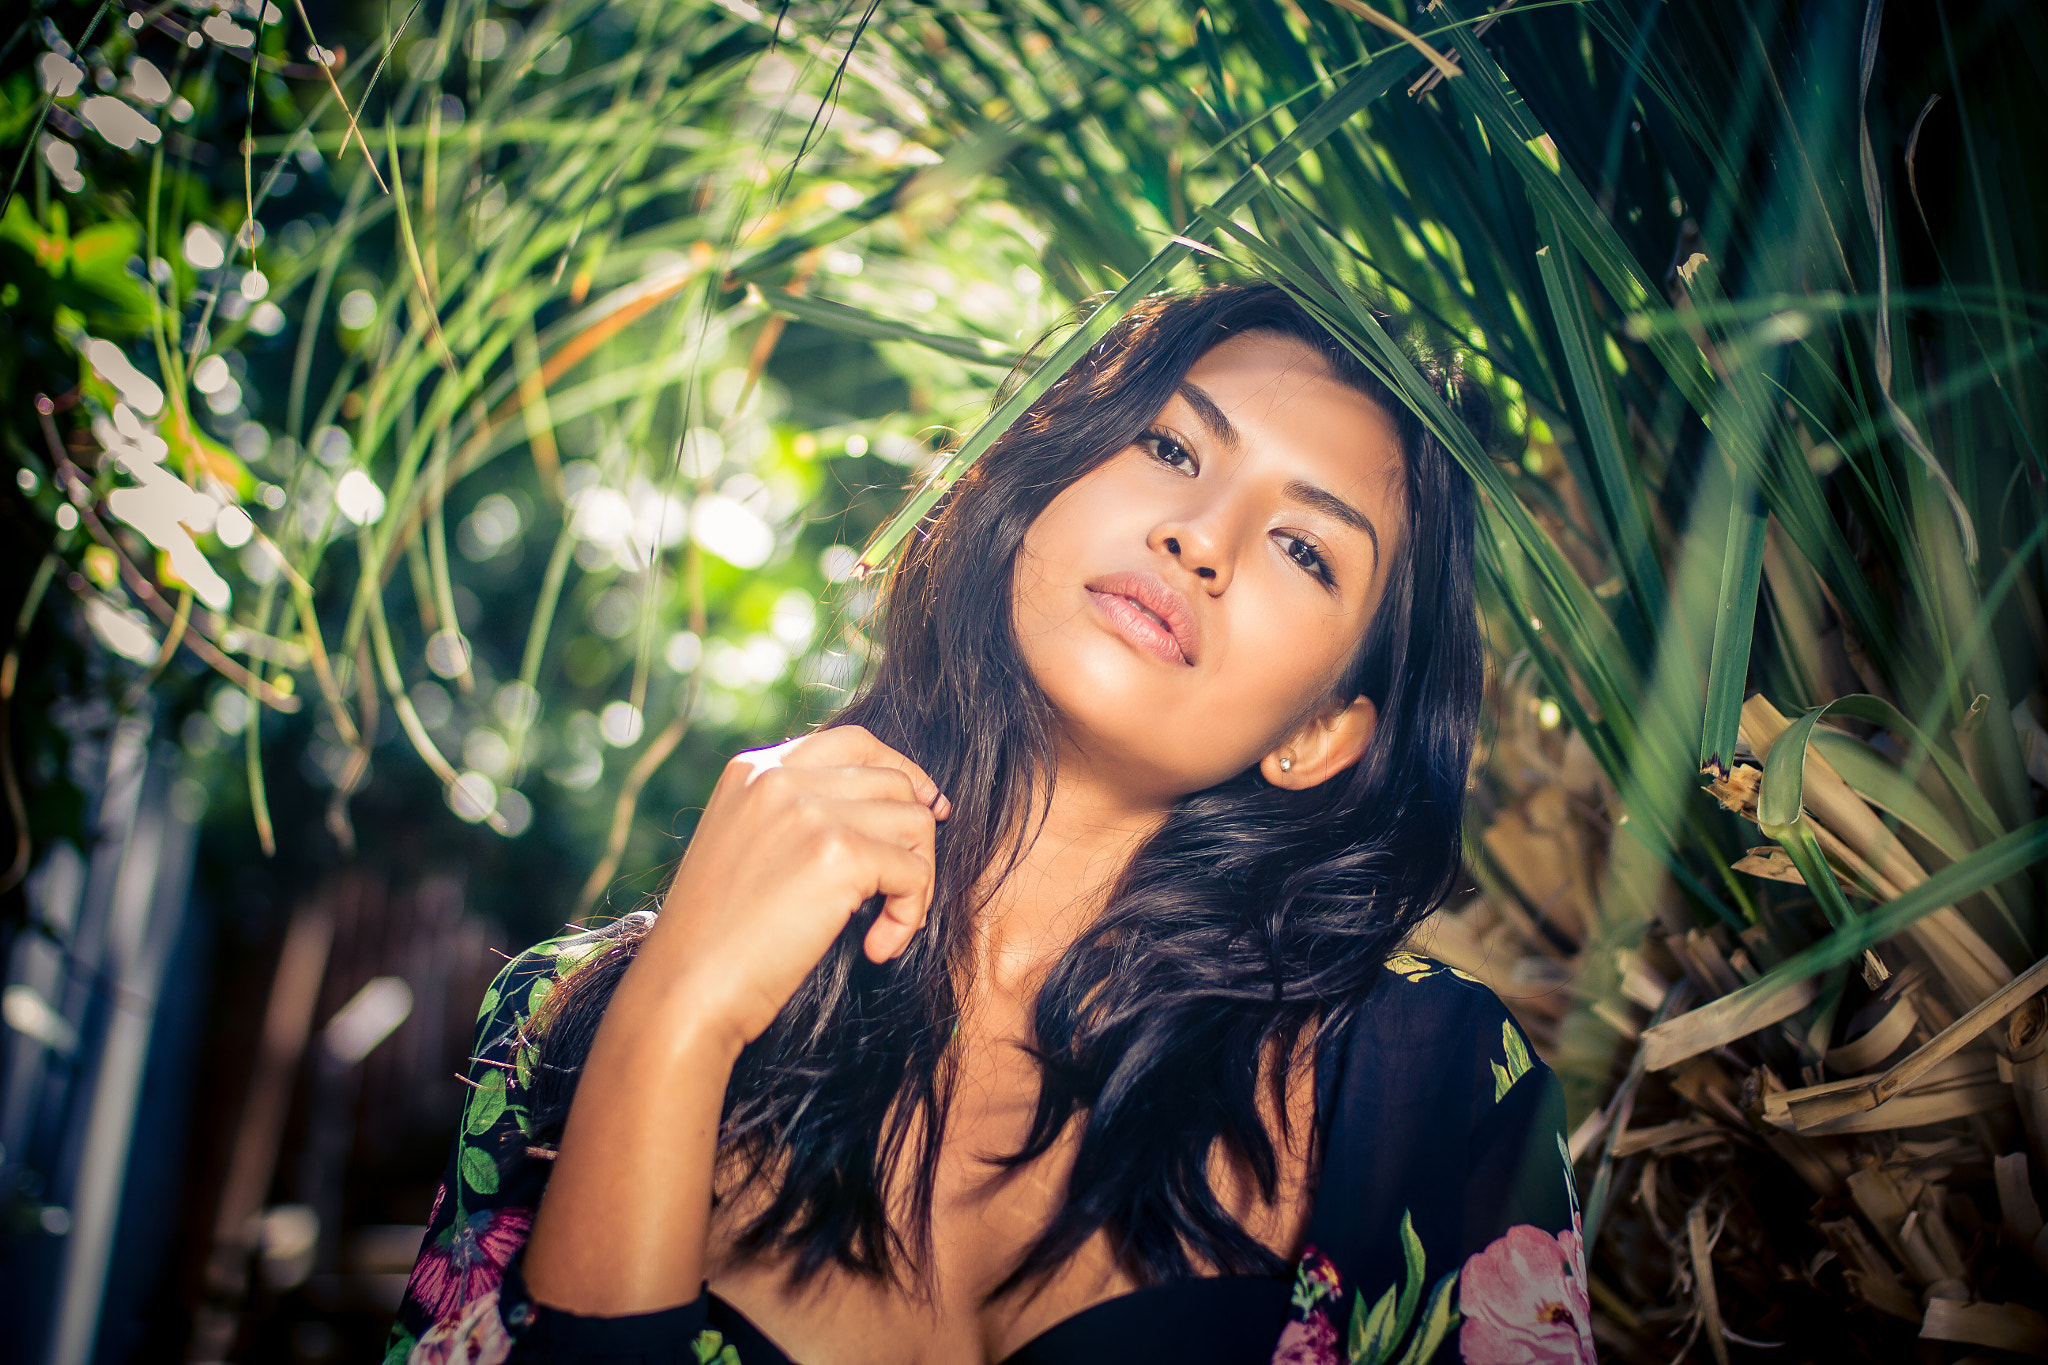 Canon EOS 7D + Sigma 35mm F1.4 DG HSM Art sample photo. Tropical vibes with pilar - part 6/7 photography